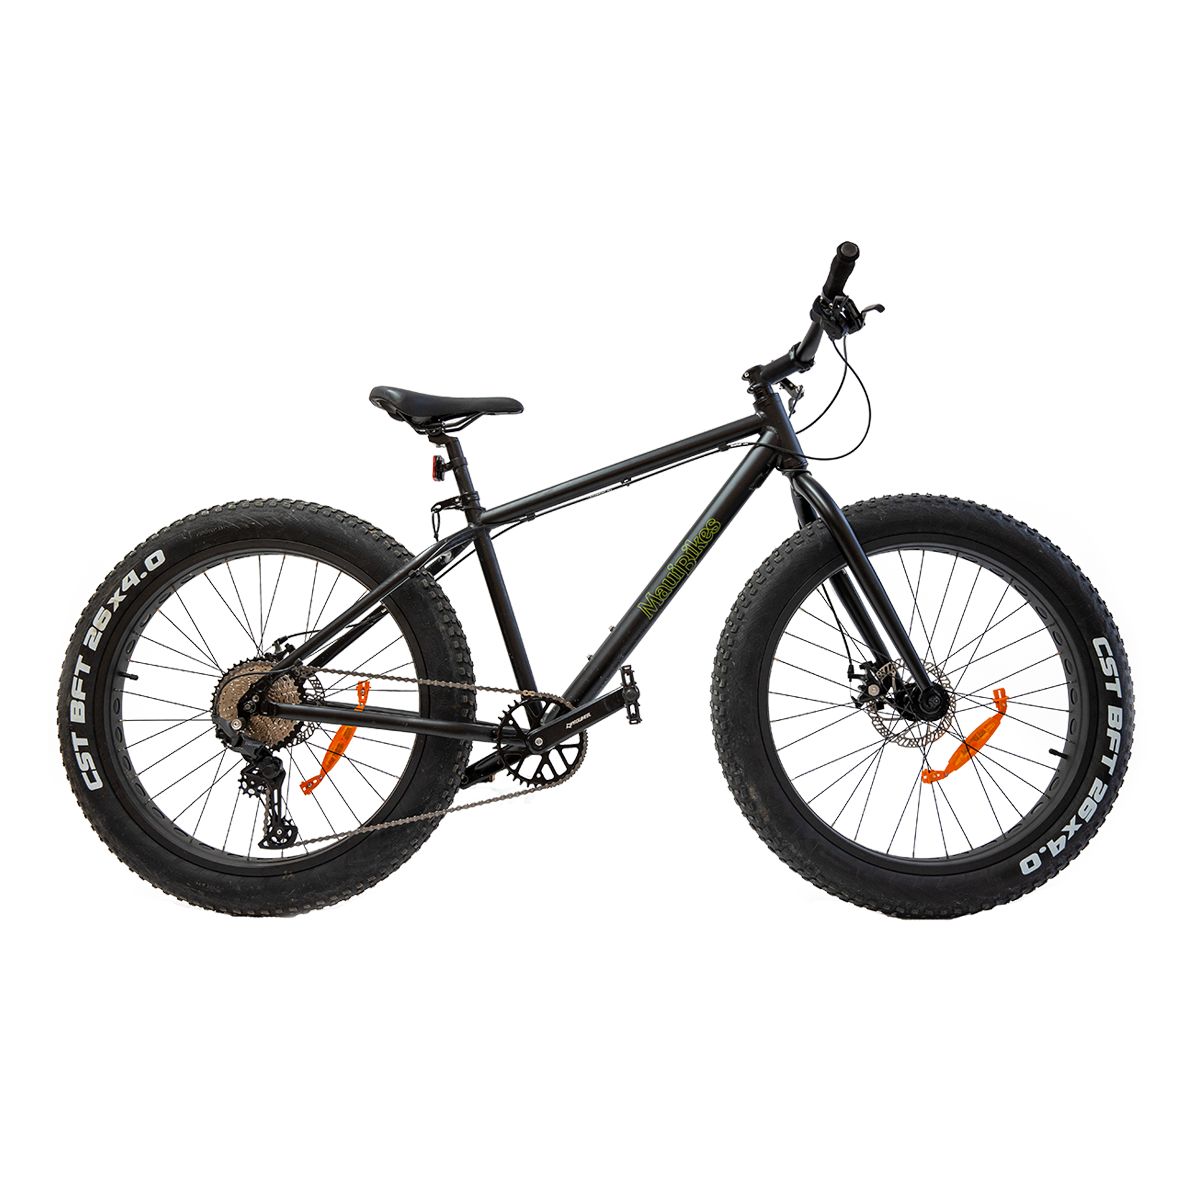 26" Fat Bike Camo with frame of 17.5"